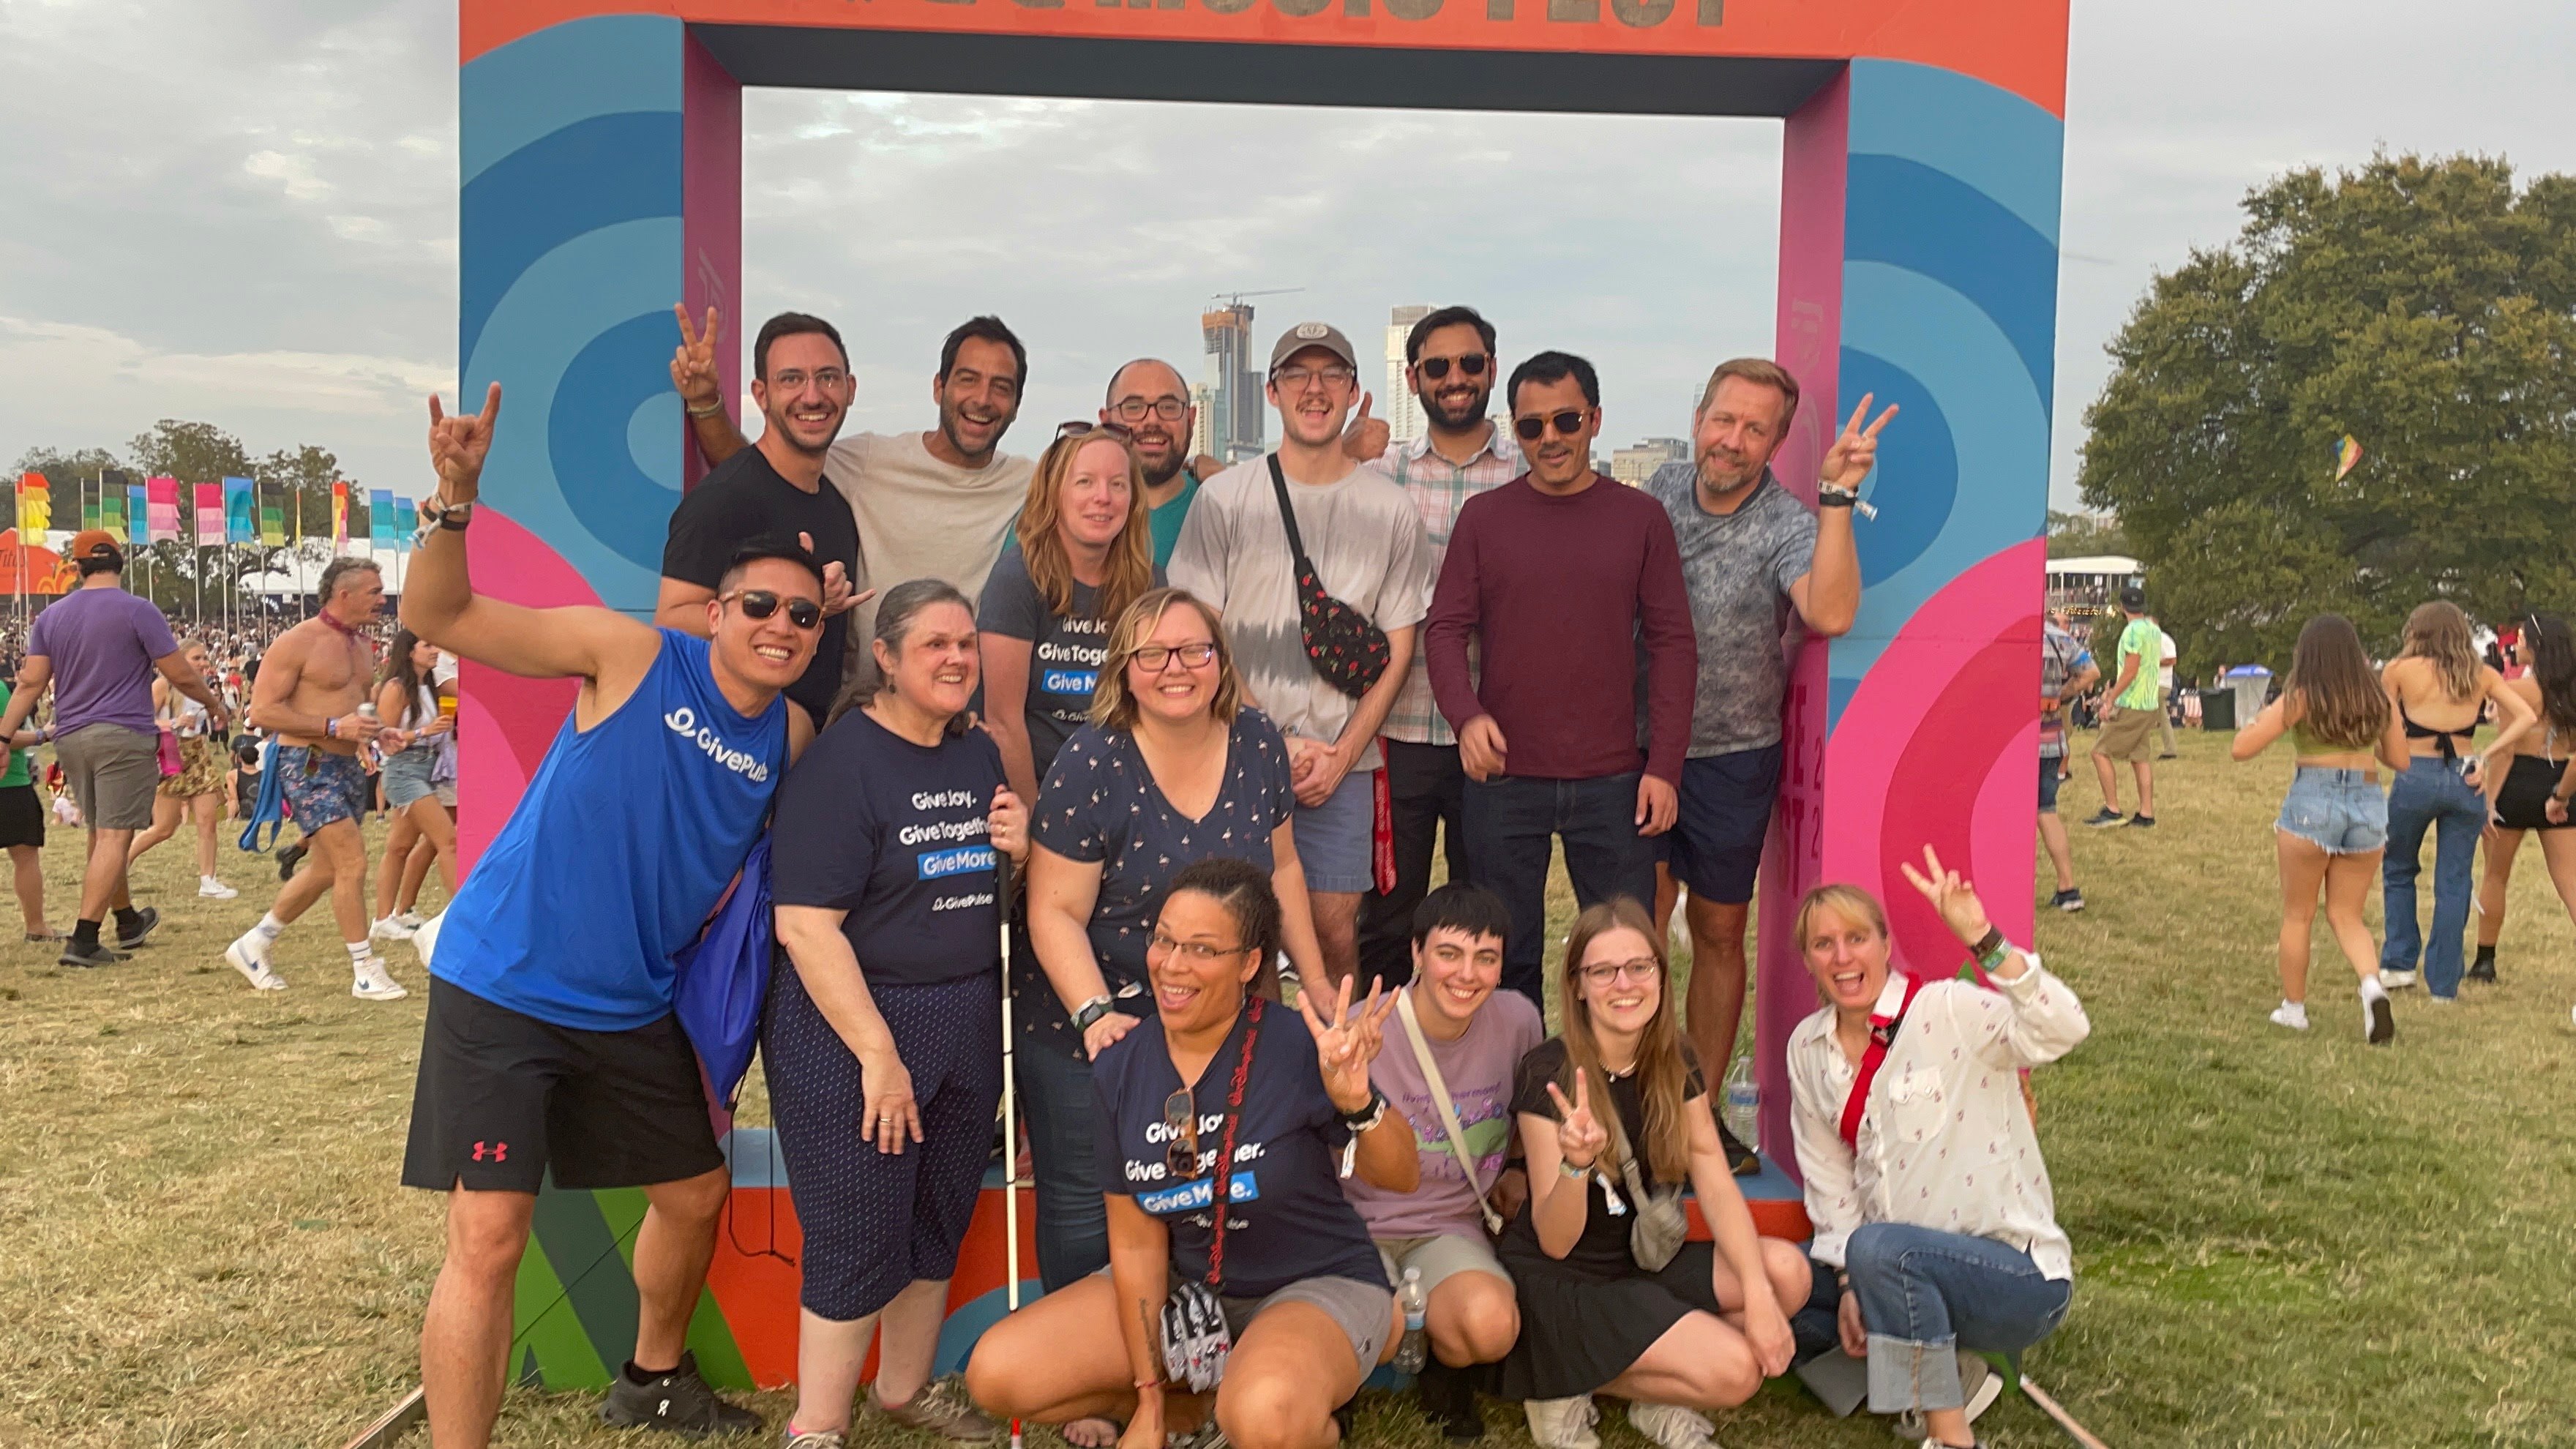 GivePulse team group picture having a great time at the Austin City Limits music festival where we got the chance to meet up with one of our clients, Austin Parks Foundation, responsible for coordinating volunteering during the festival